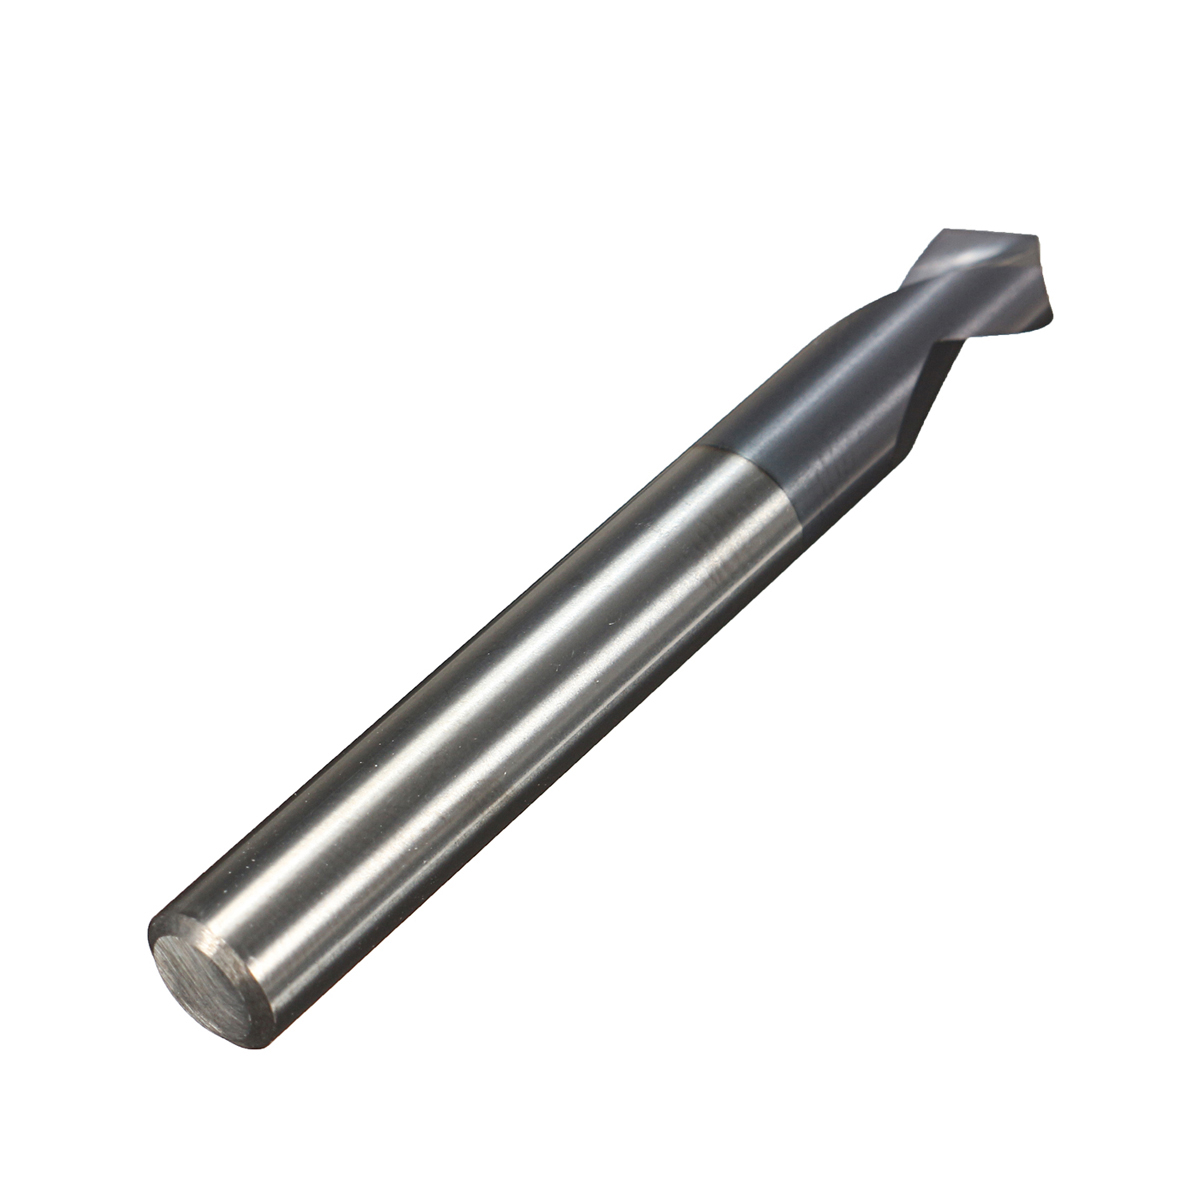 Drillpro-2-Flutes-6mm-Carbide-Chamfer-Mill-90-Degree-HRC45-Milling-Cutter-1108522-3